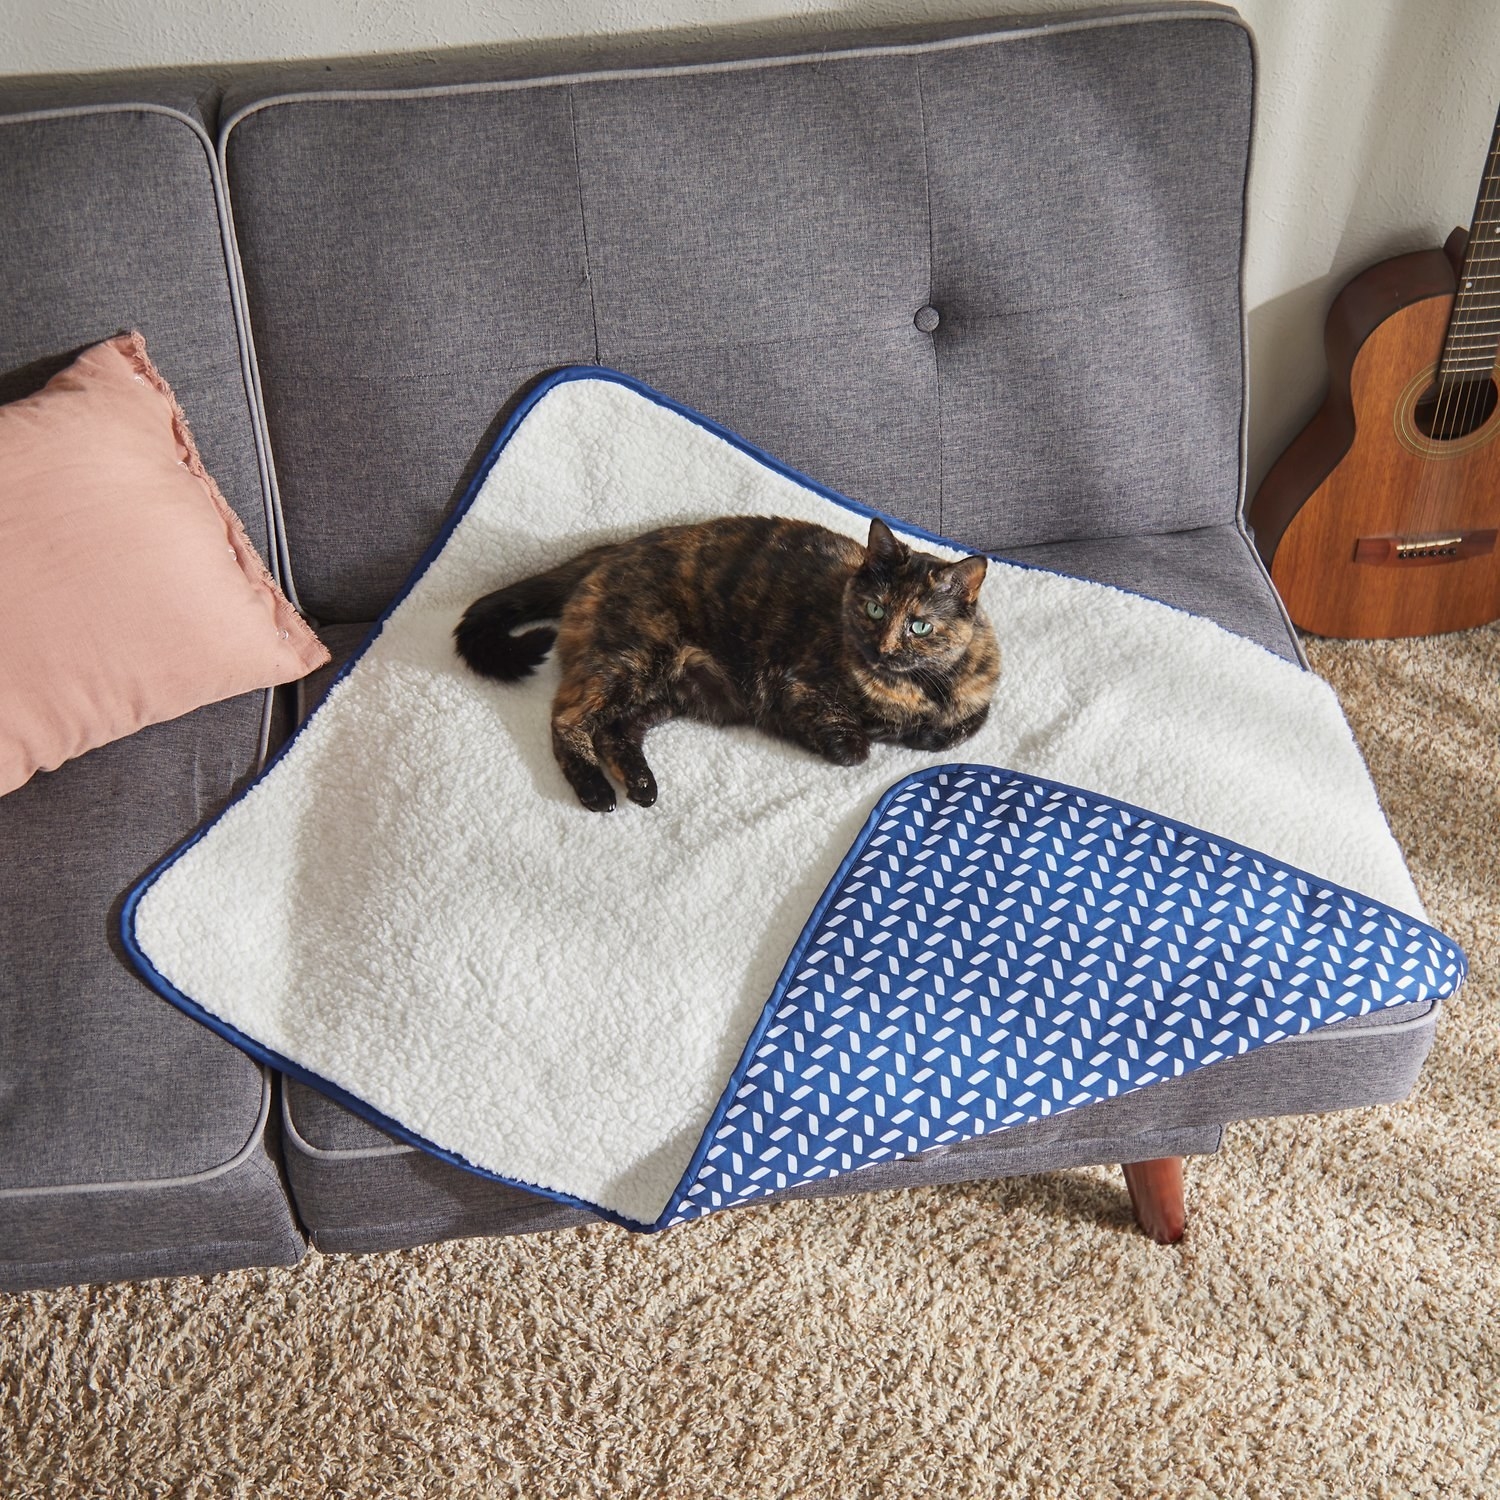 cat lying on a sherpa blanket with blue patterned side